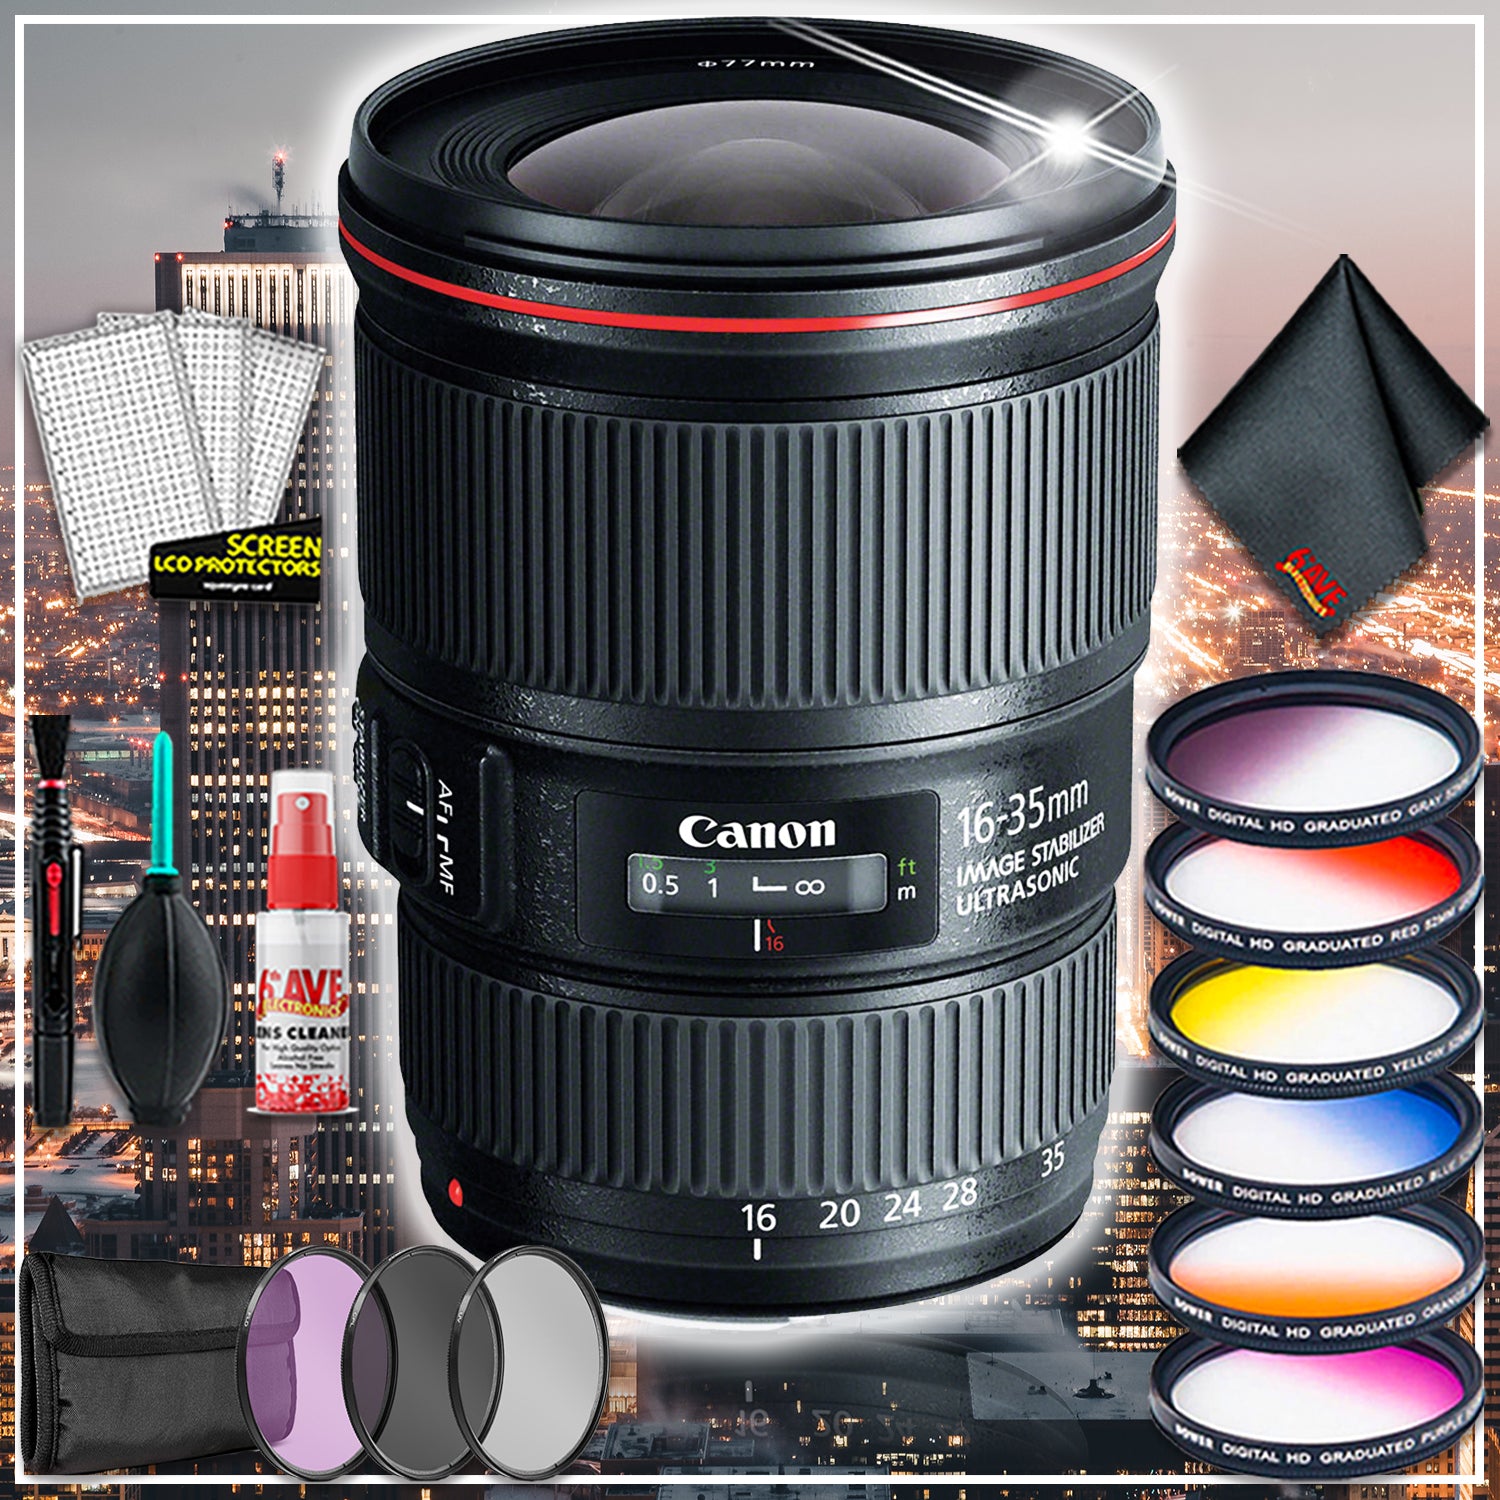 Canon EF 16-35 4.0 f/4 L IS USM (Intl Model) With Premium Lens Filters